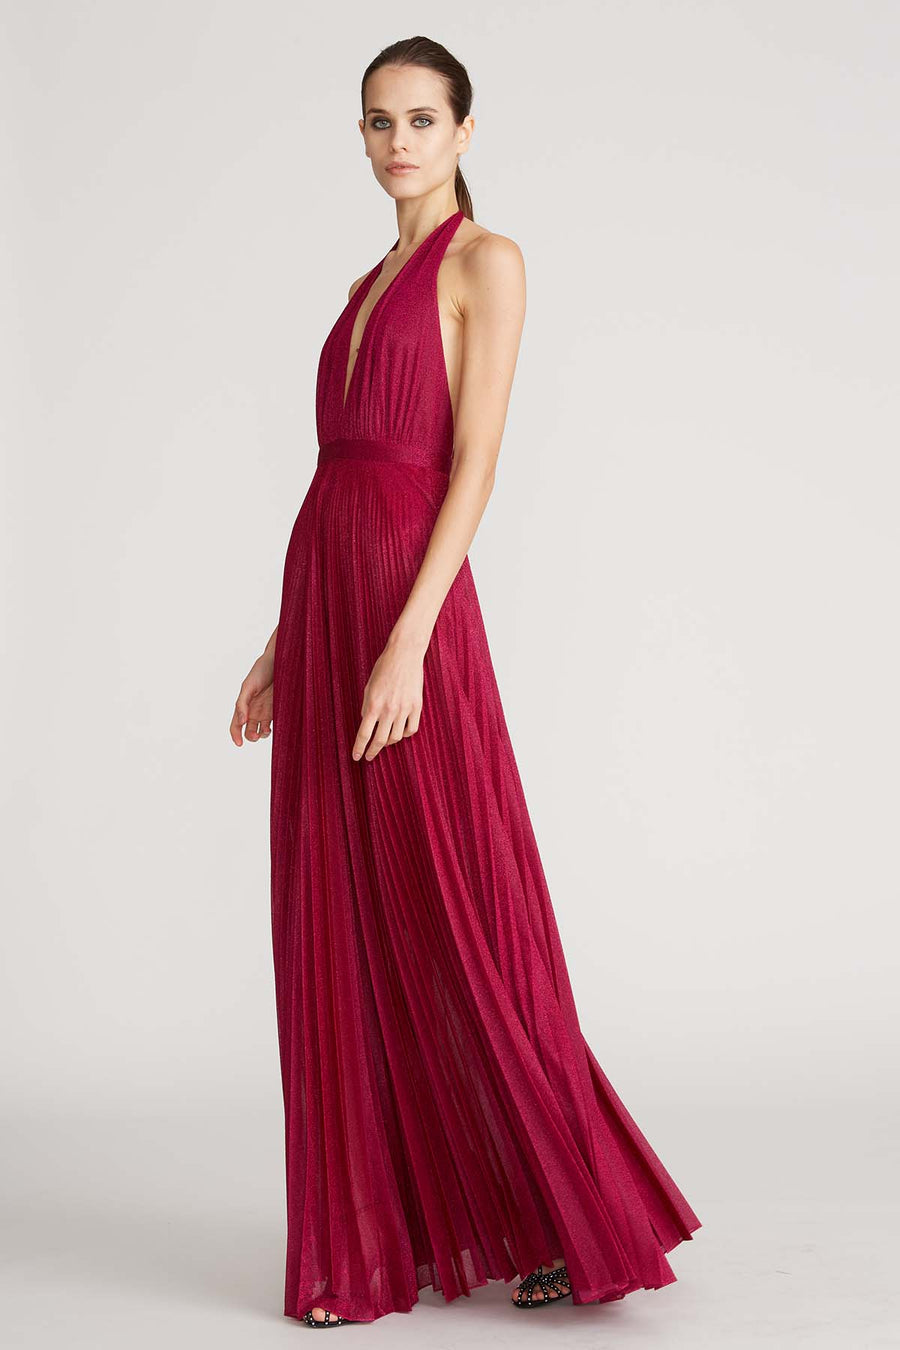 Chris Pleated Jersey Gown